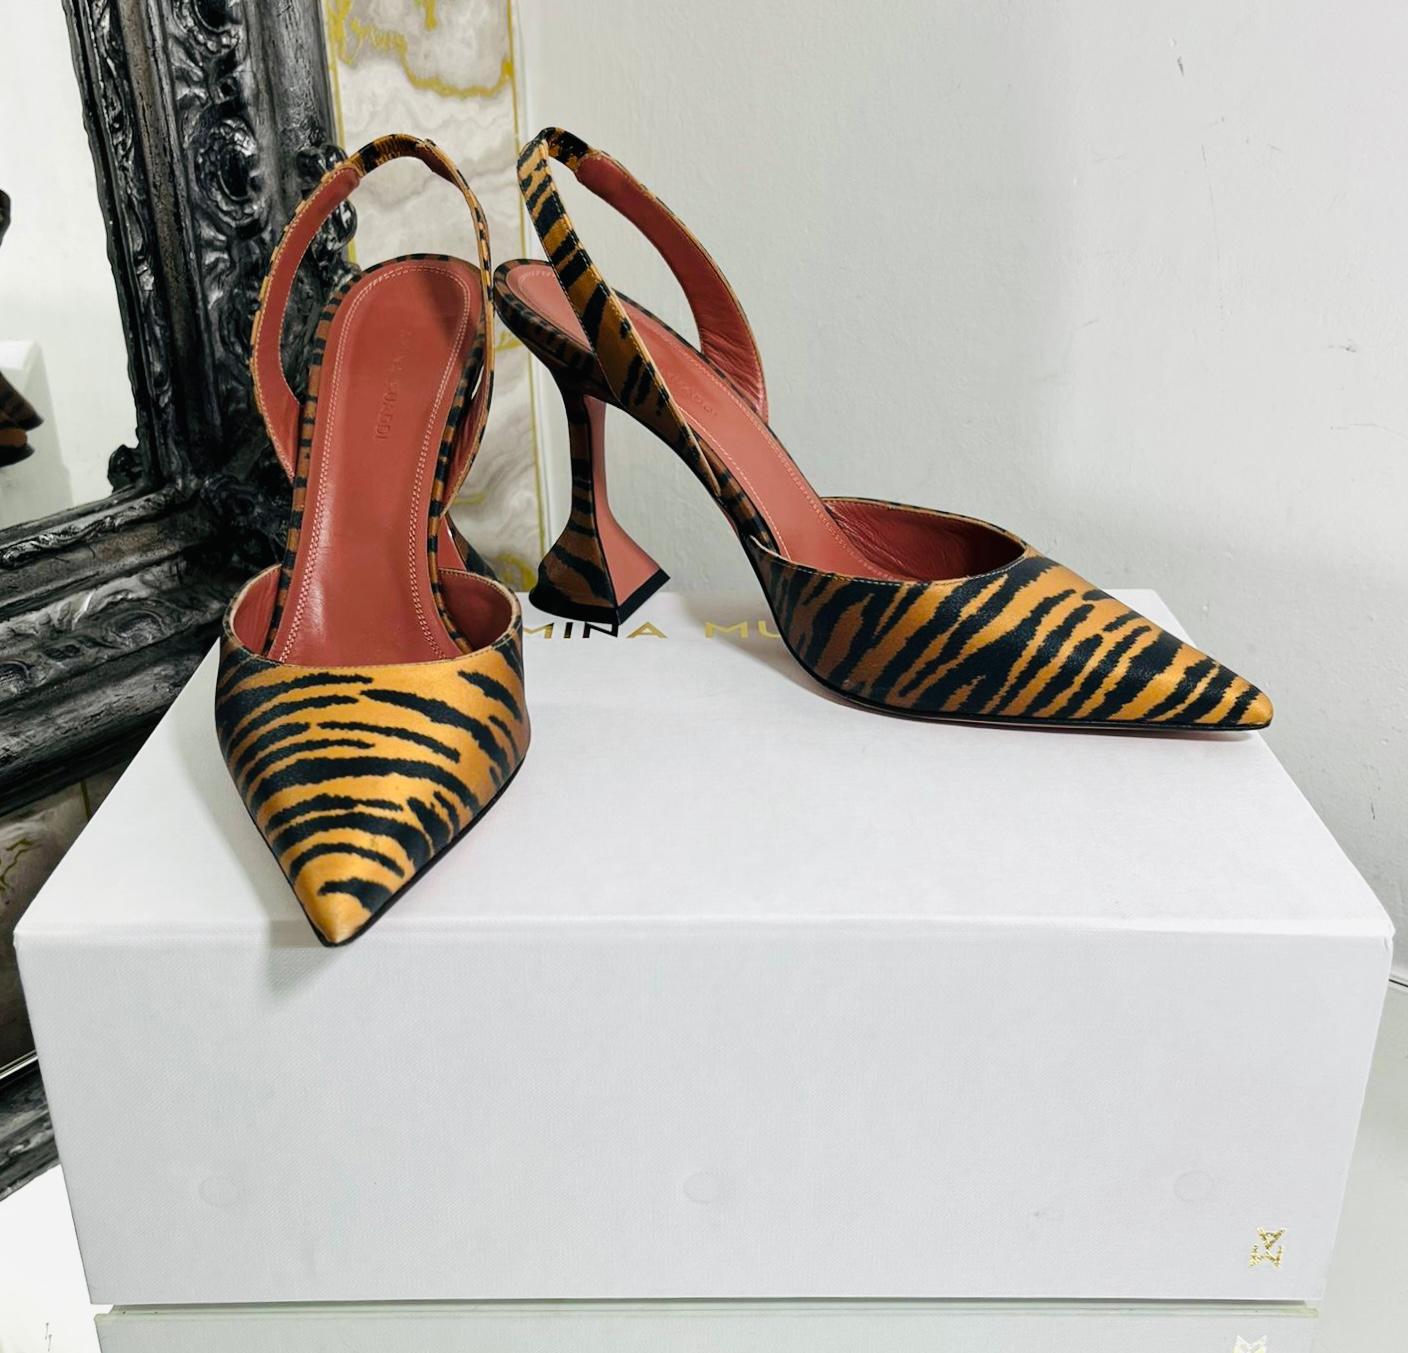 Amina Muaddi Tiger Print Satin Pumps

Heeled 'Holli' pumps designed with tiger print in tan and black.

Detailed with pointed toe and signature martini-shaped heel.

Featuring partially elasticated slingback stripe and leather lining. Rrp £620

Size